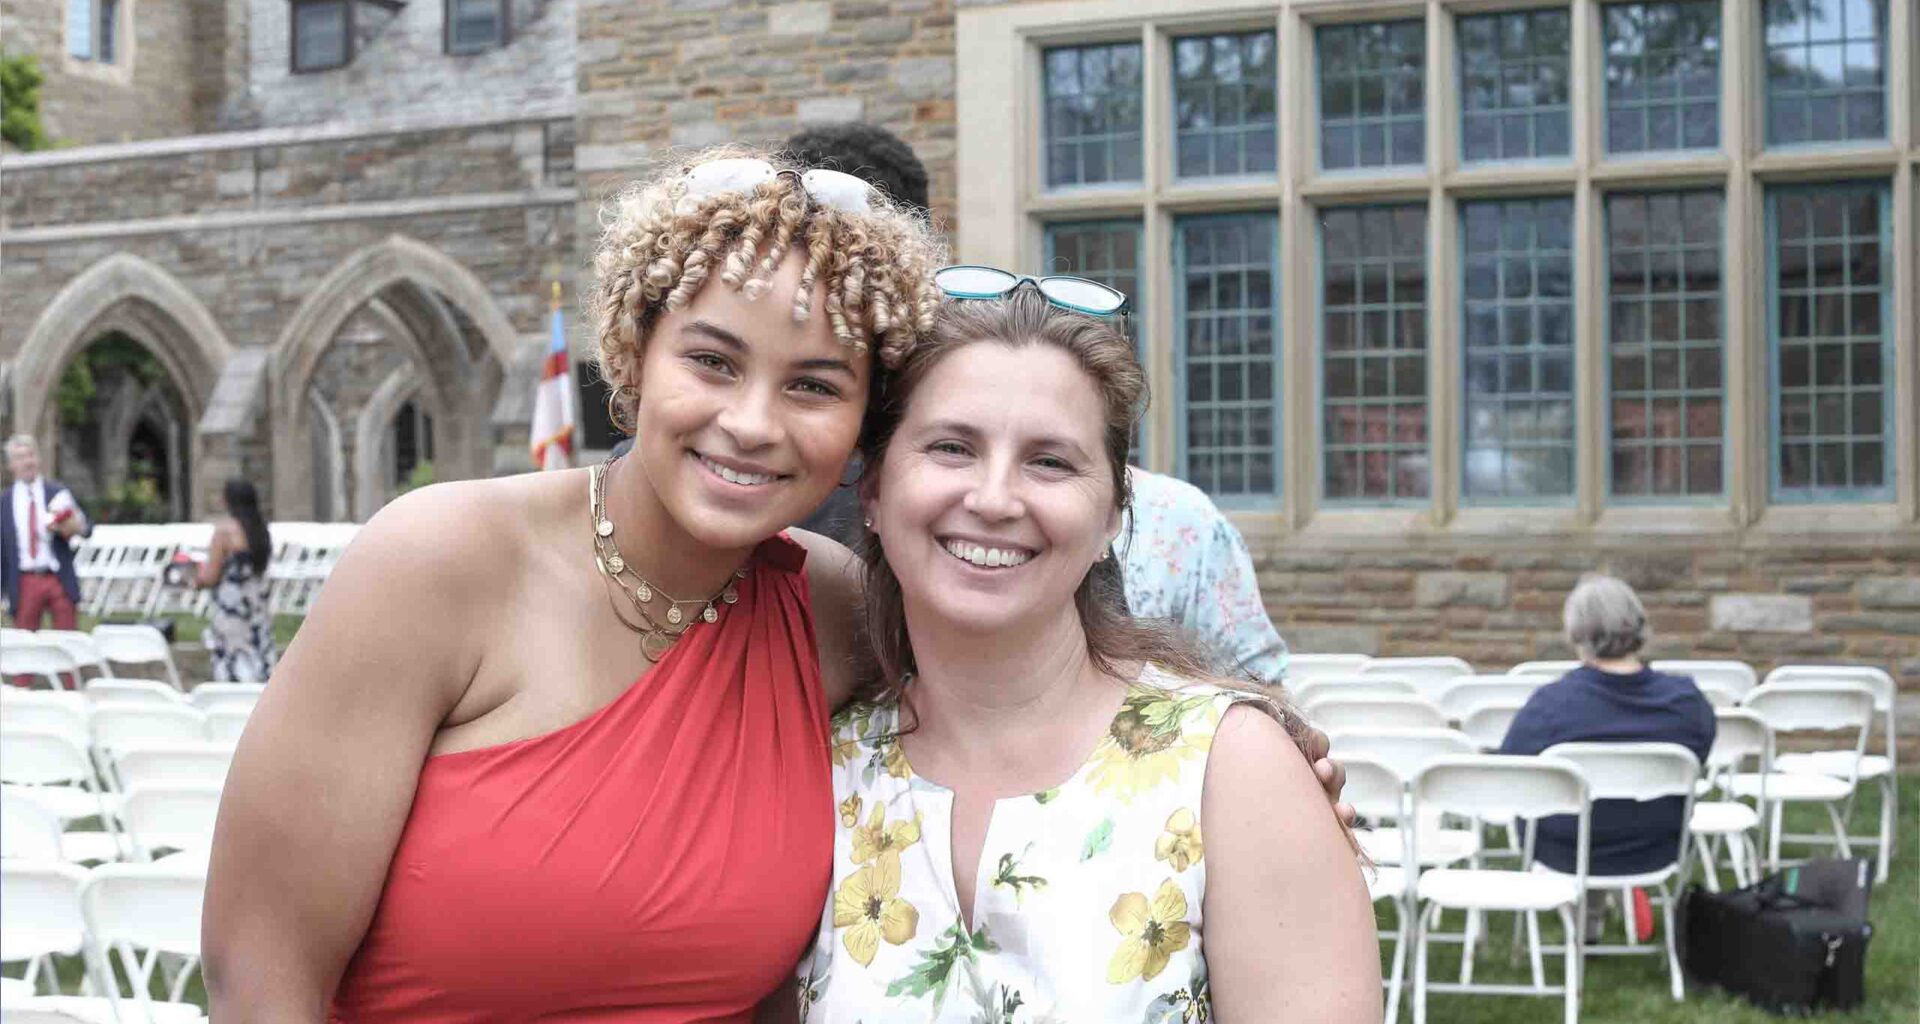 Marie in a red dress and Ms. Klecan in floral dress side-by-side embracing for a candid photo memory after Commencement at St. Andrew's School May 2023.